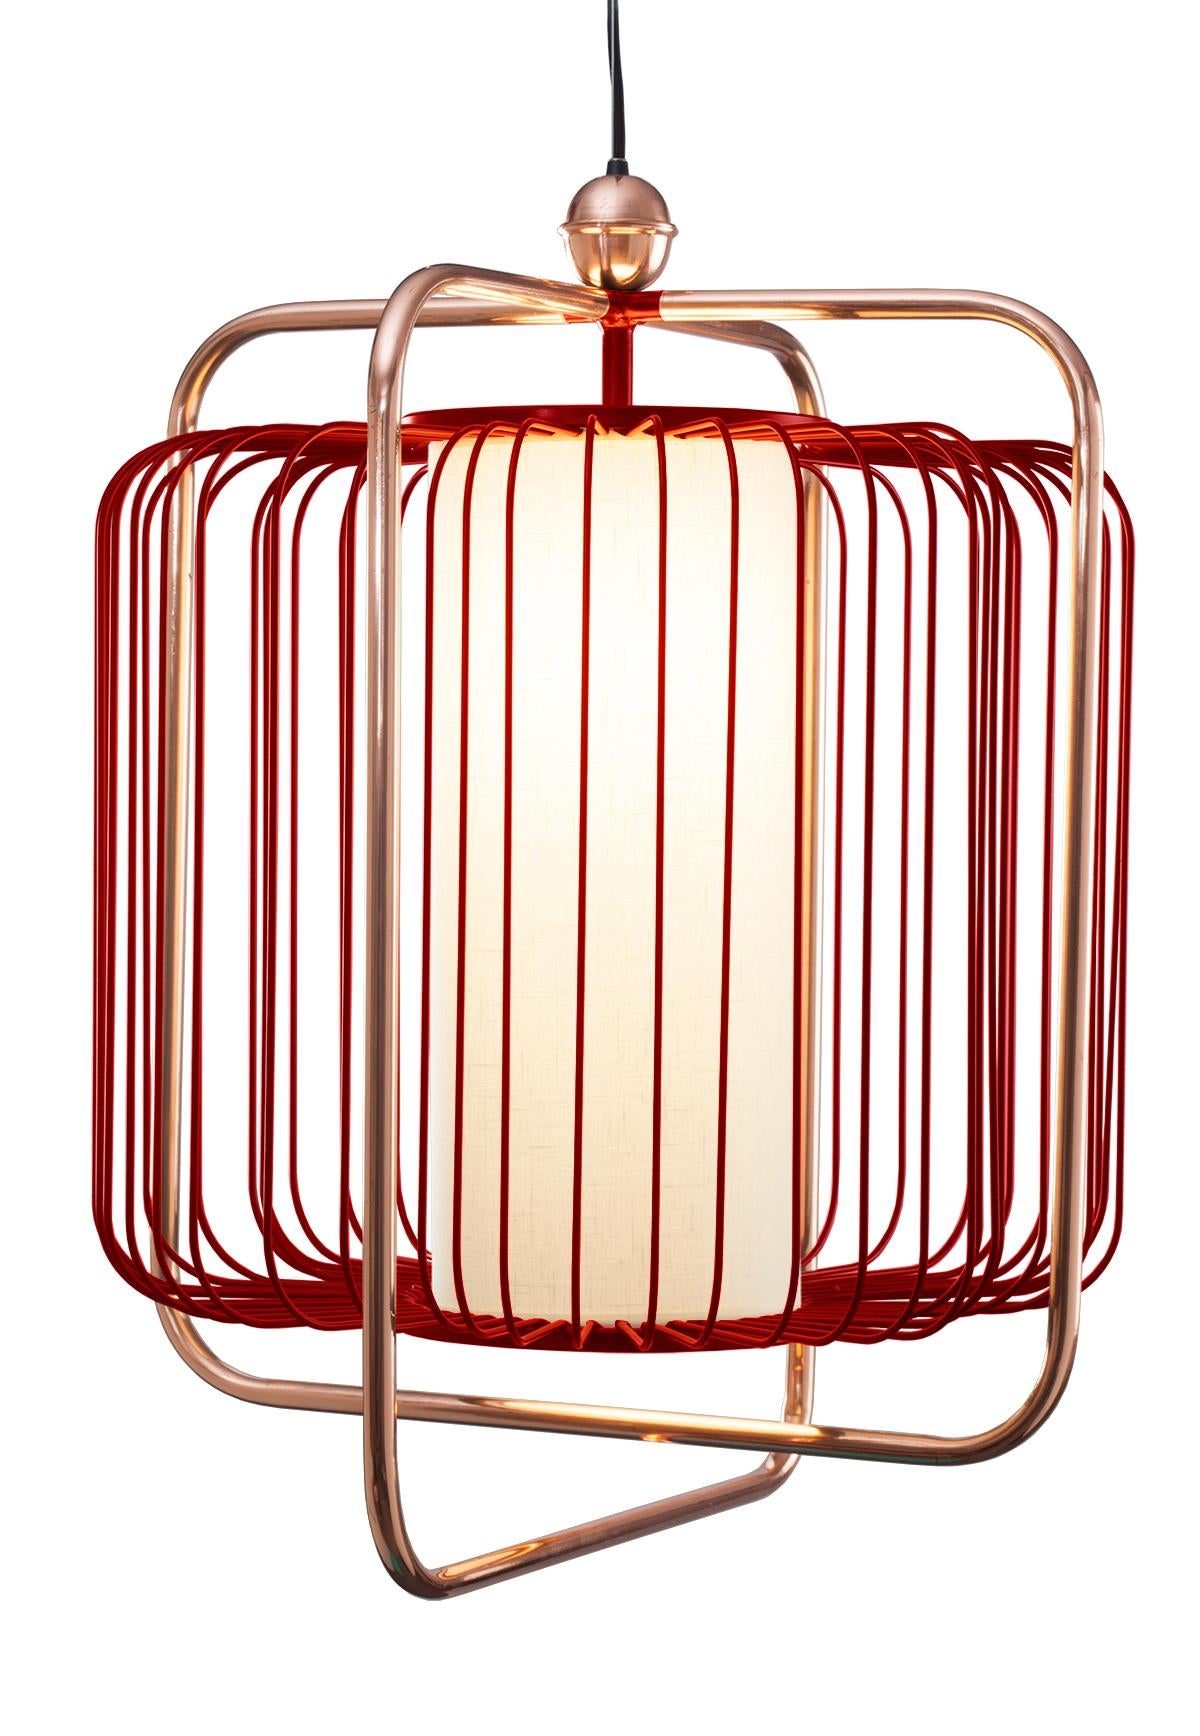 Contemporary Art Deco inspired Jules Pendant Lamp in Copper, Ivory and Linen For Sale 8